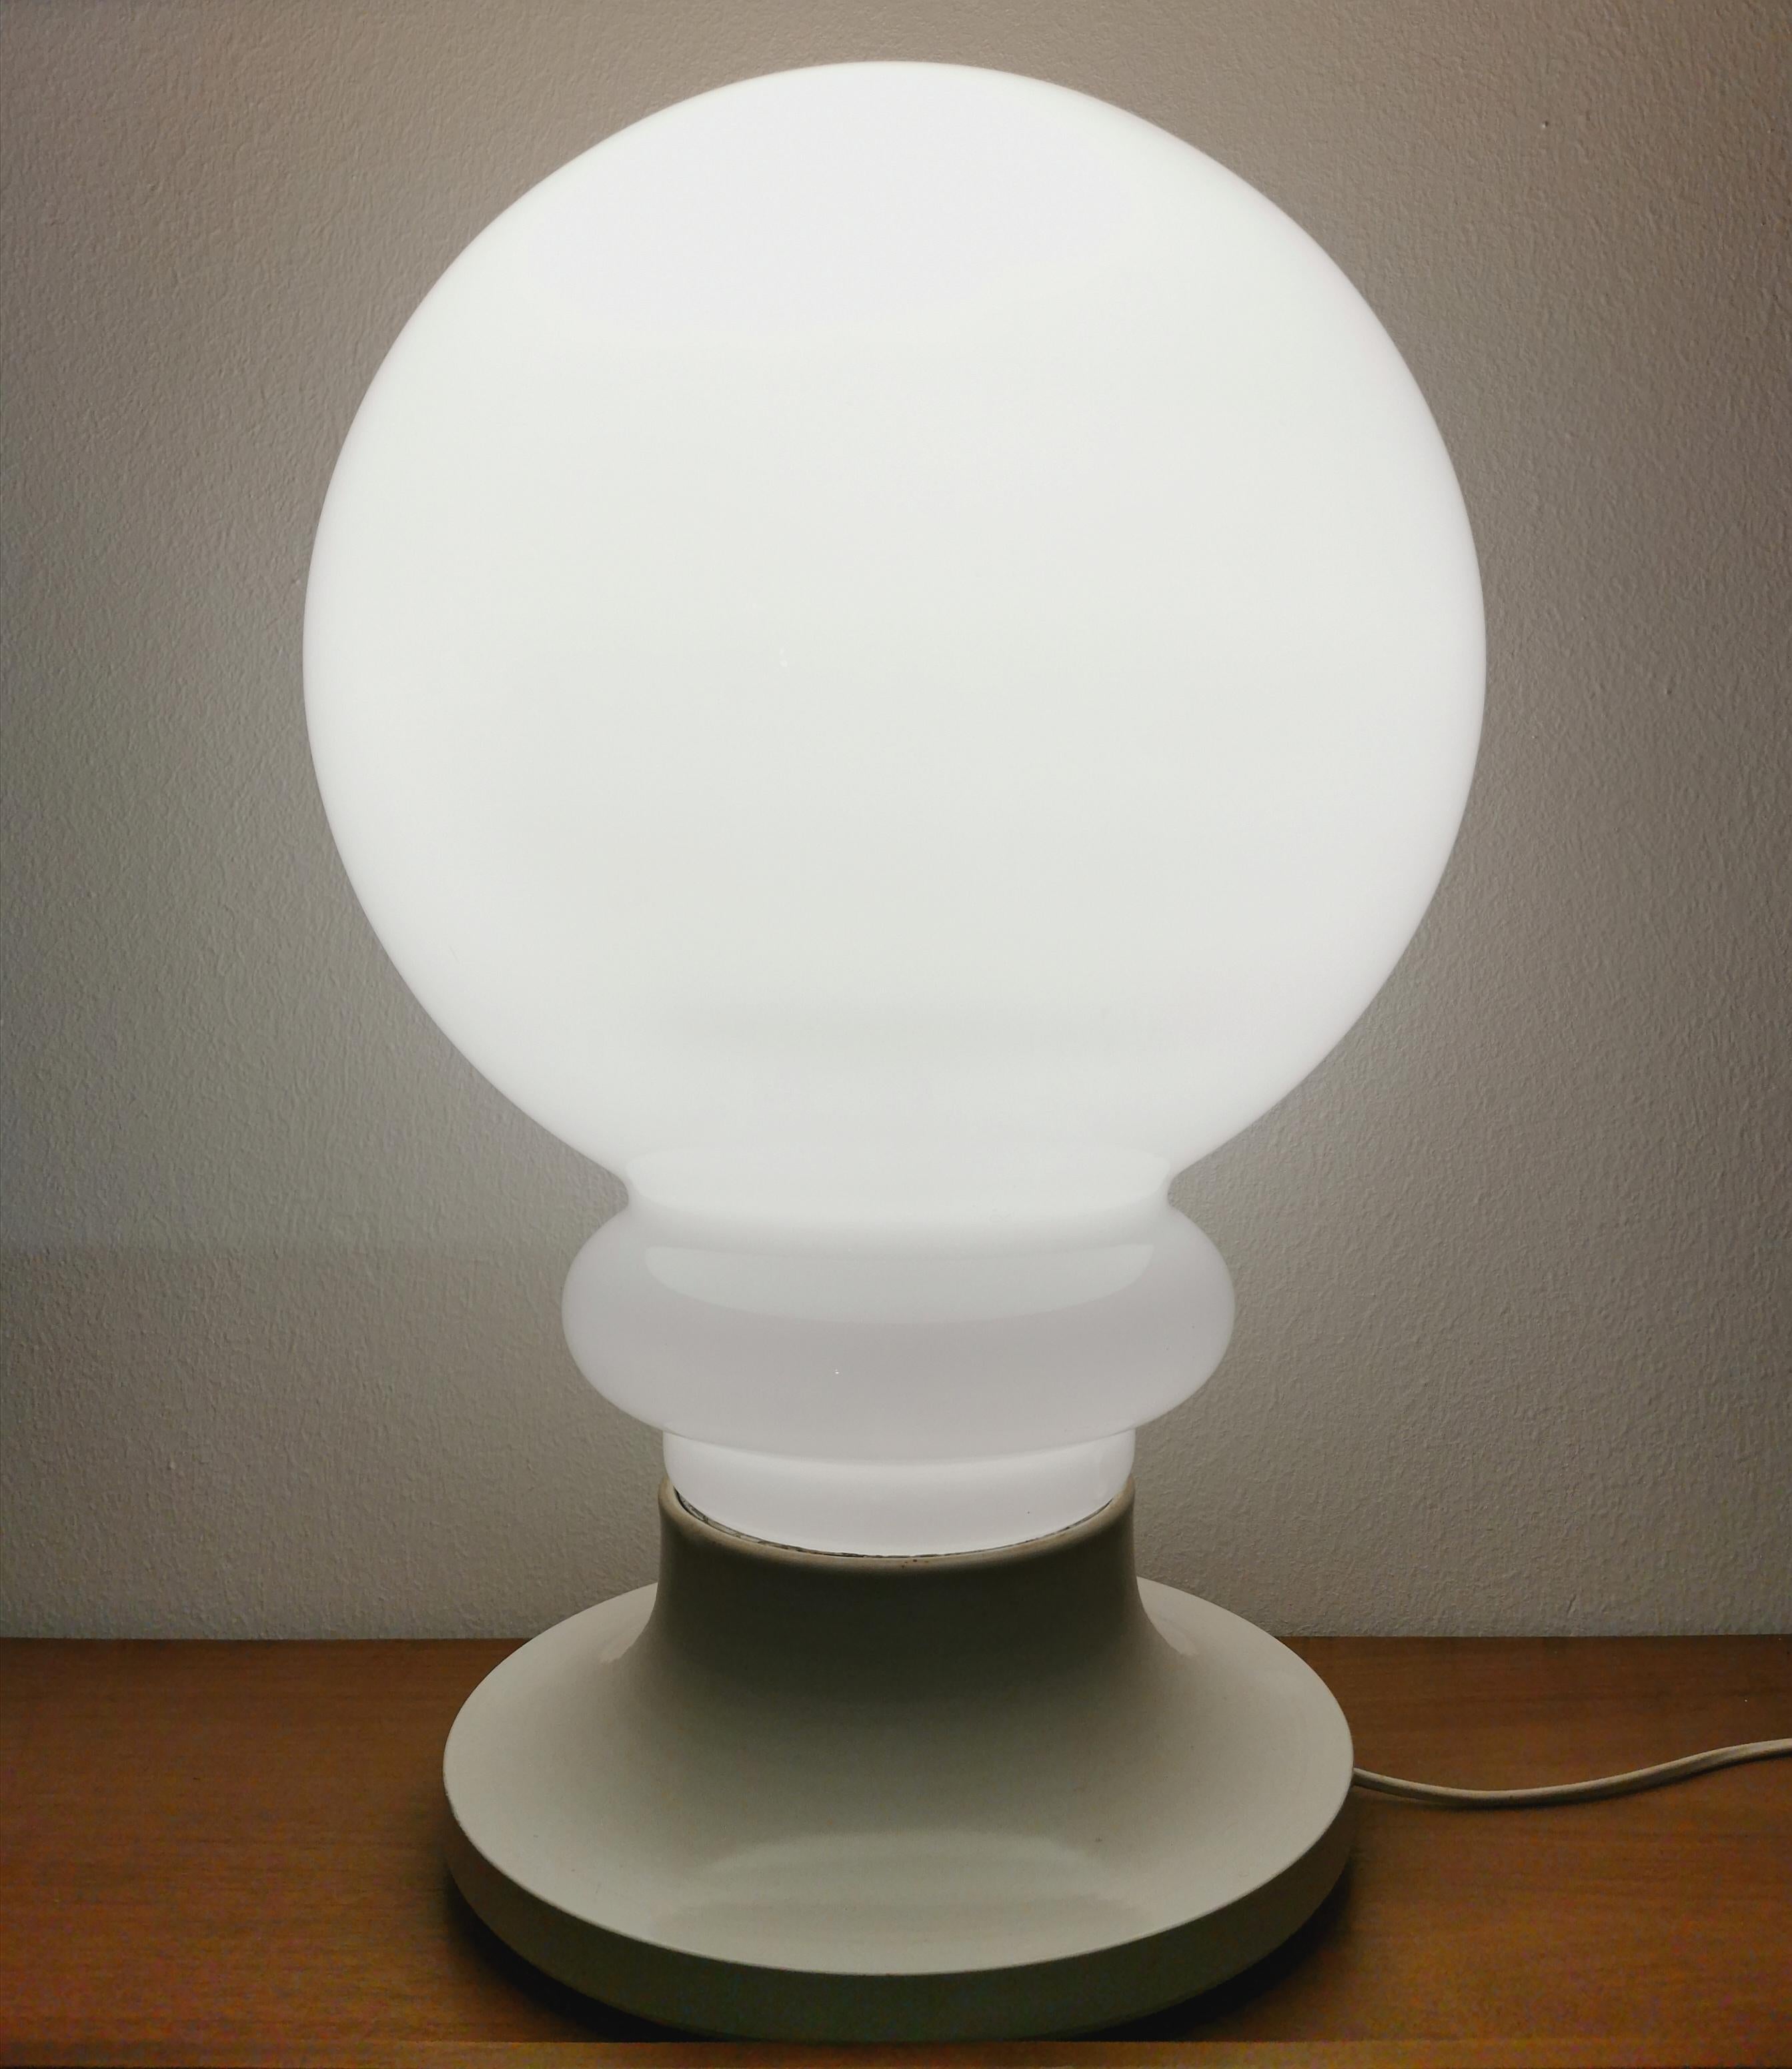 Table lamp designed by the Italian designer Carlo Nason in the 60s. The lamp has a spherical bowl in milky glass and an enamelled aluminum base.